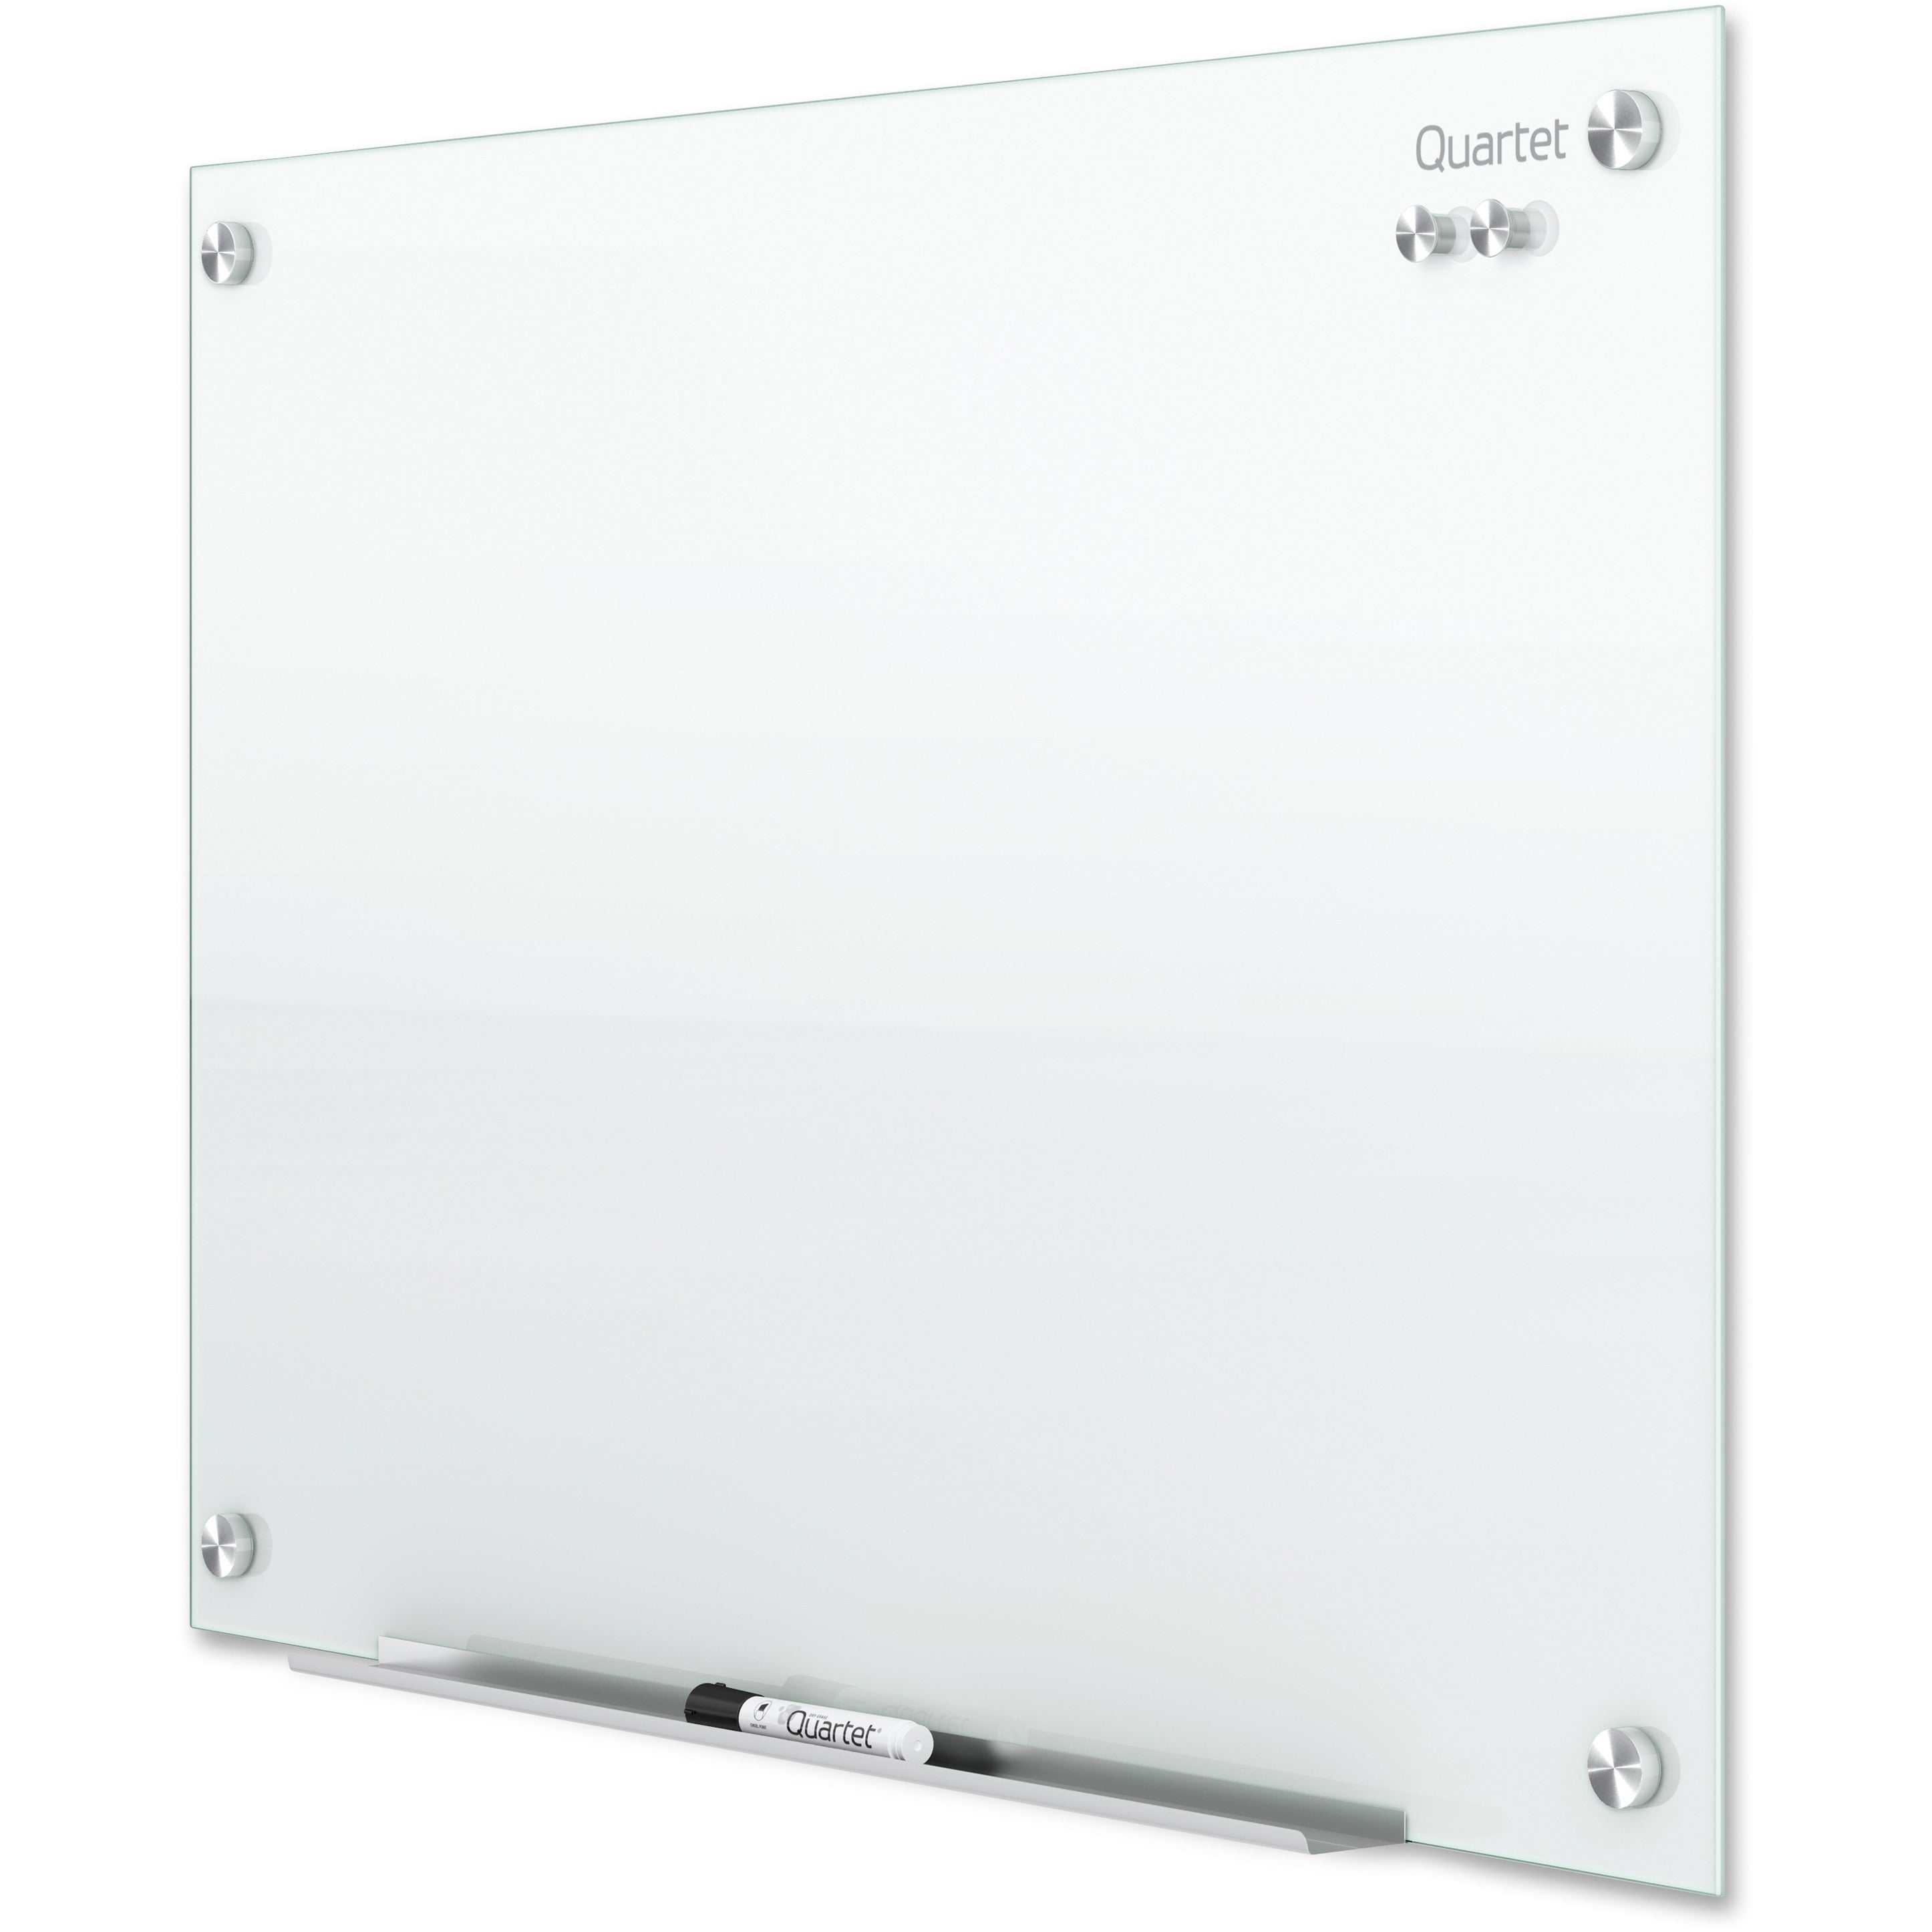 Quartet Infinity Glass Dry-Erase Whiteboard - 96" (8 ft) Width x 48" (4 ft) Height - White Tempered Glass Surface - White Frame - Horizontal/Vertical - Magnetic - 1 Each - 3